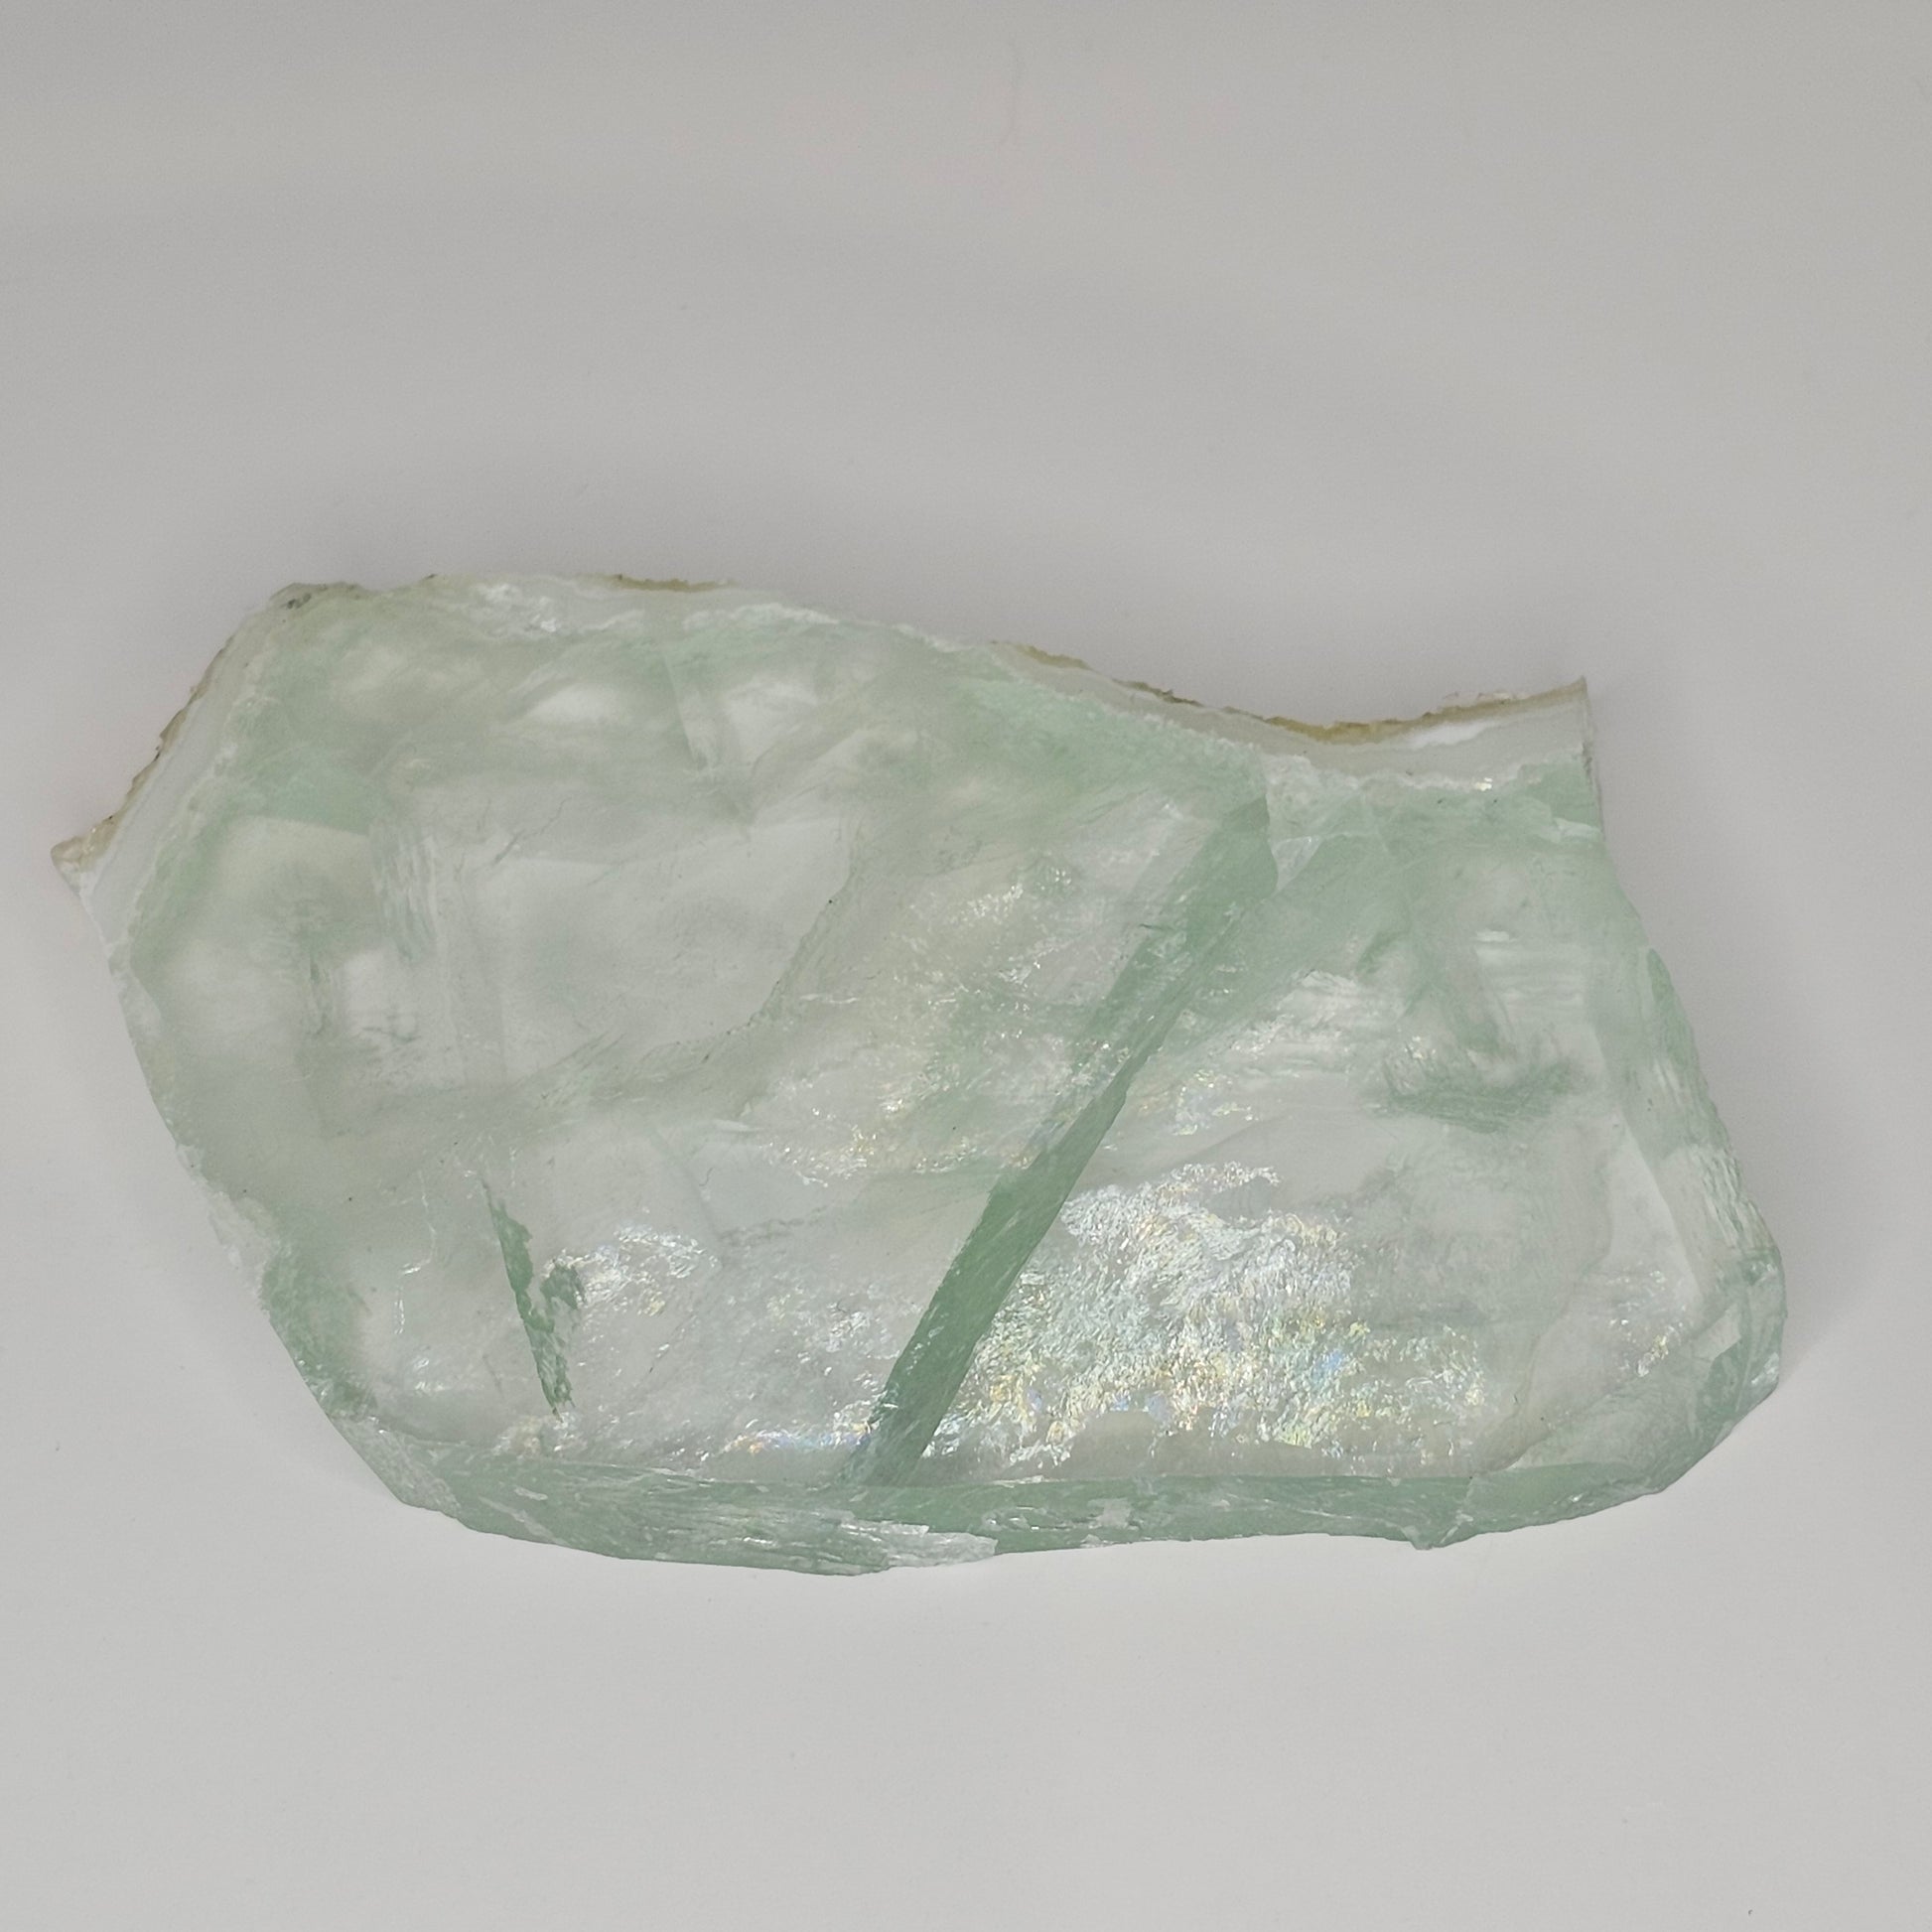 Stunning transparent Green Fluorite slab overflowing with gorgeous rainbows within.